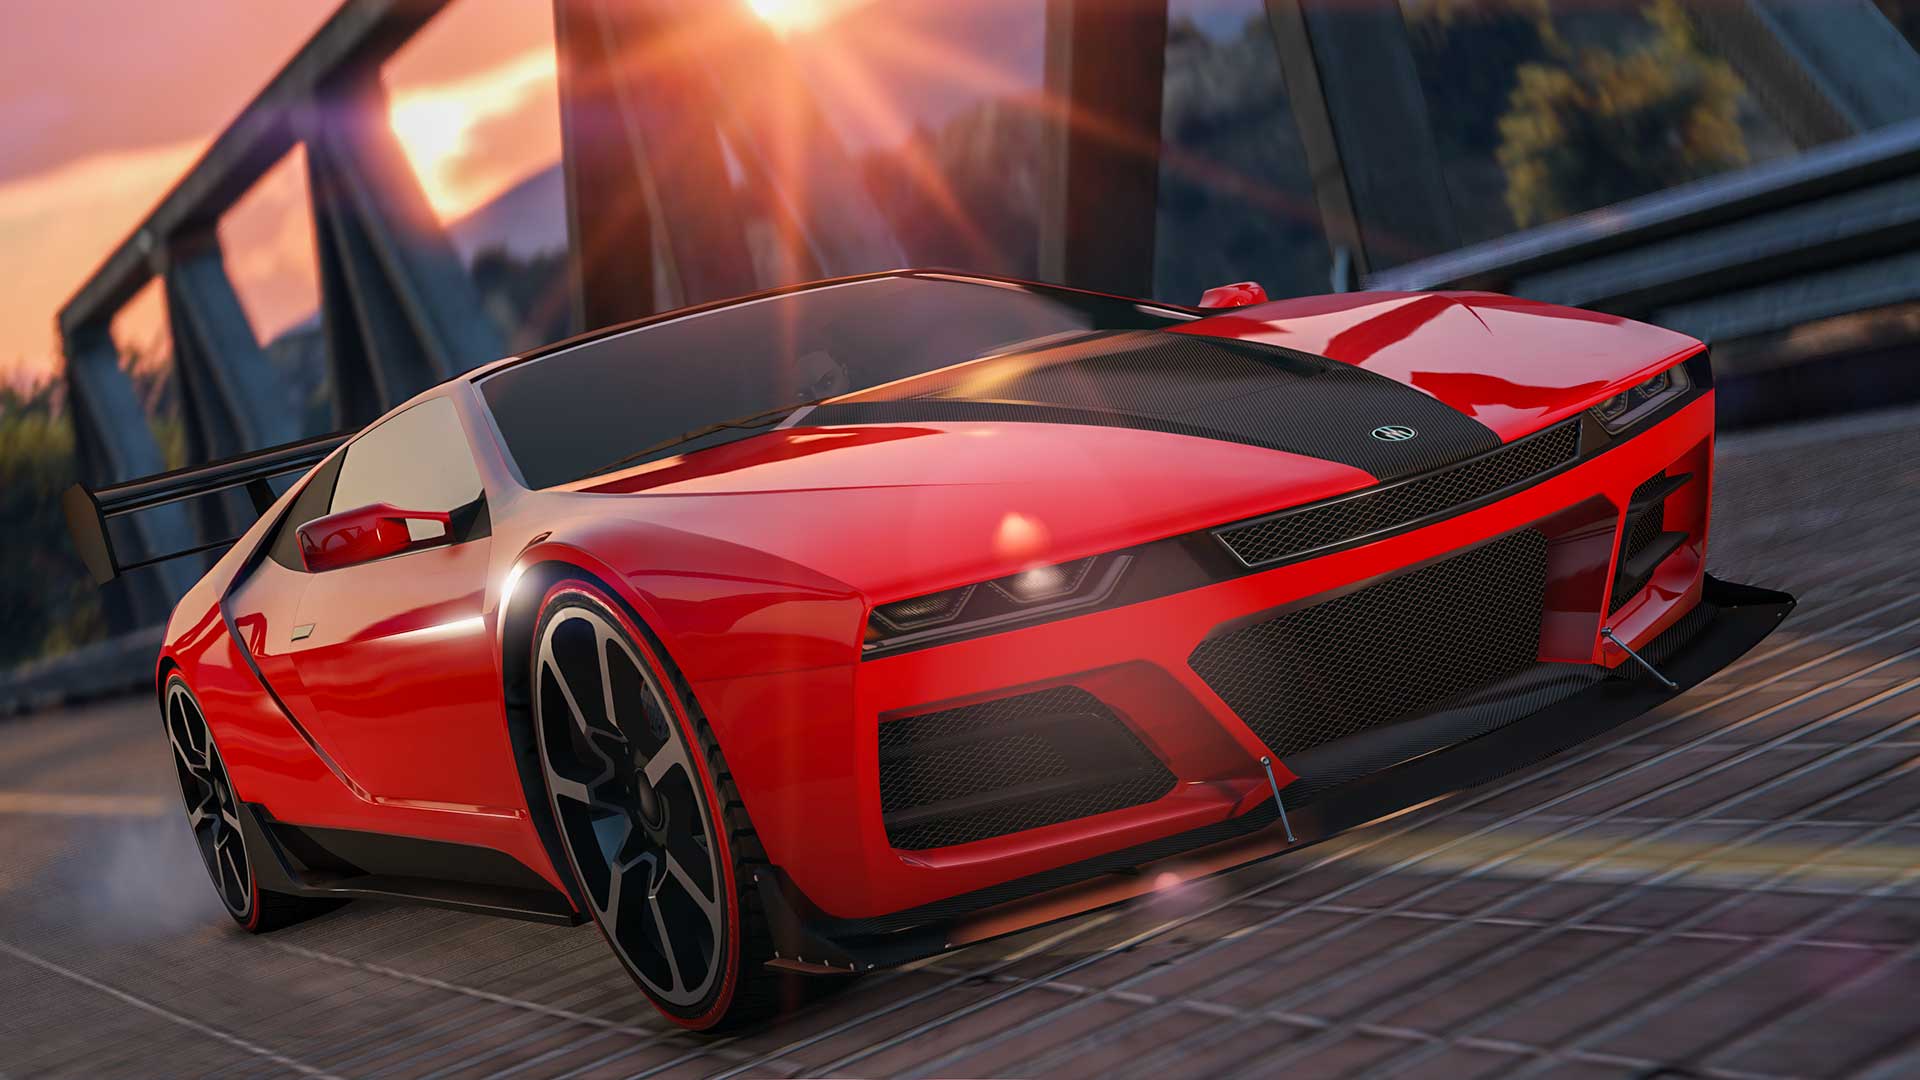 Image for GTA Online's Cayo Perico heist rolls out next month